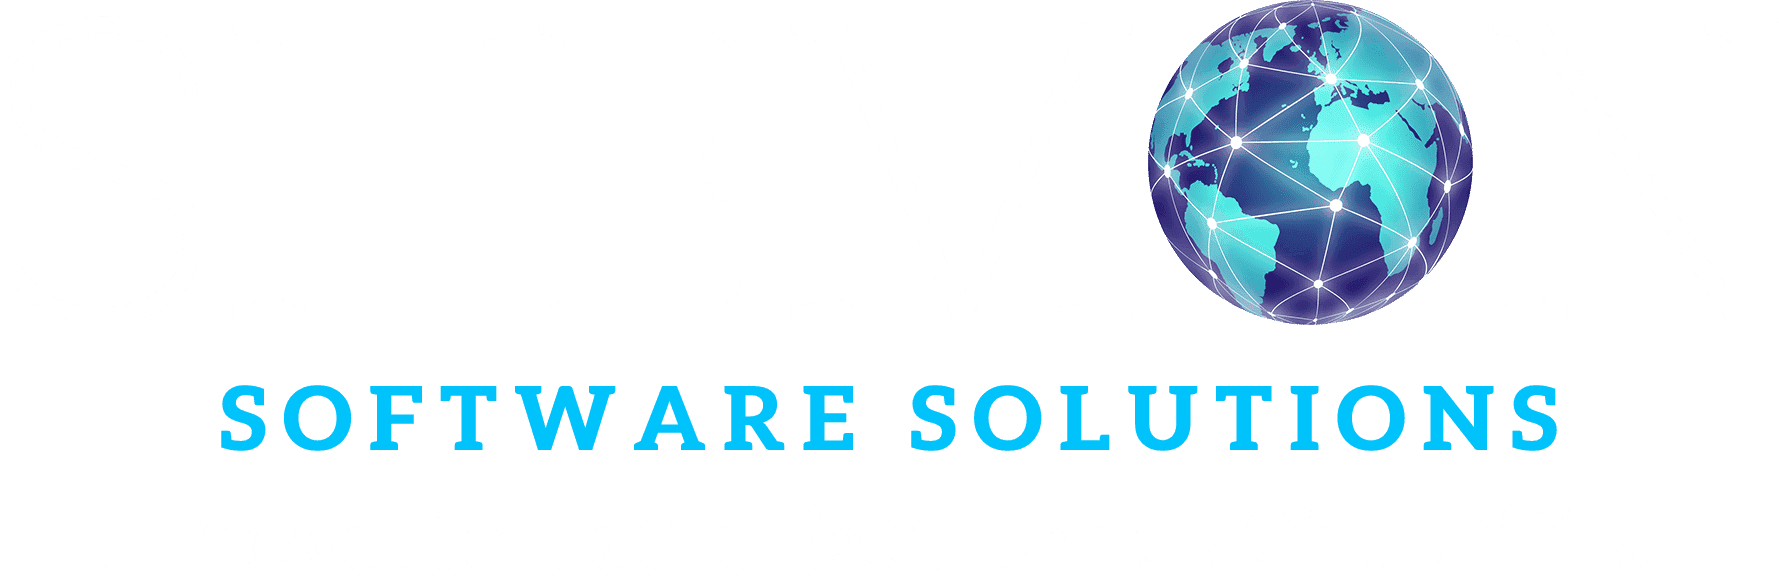 Shemon Software Solutions